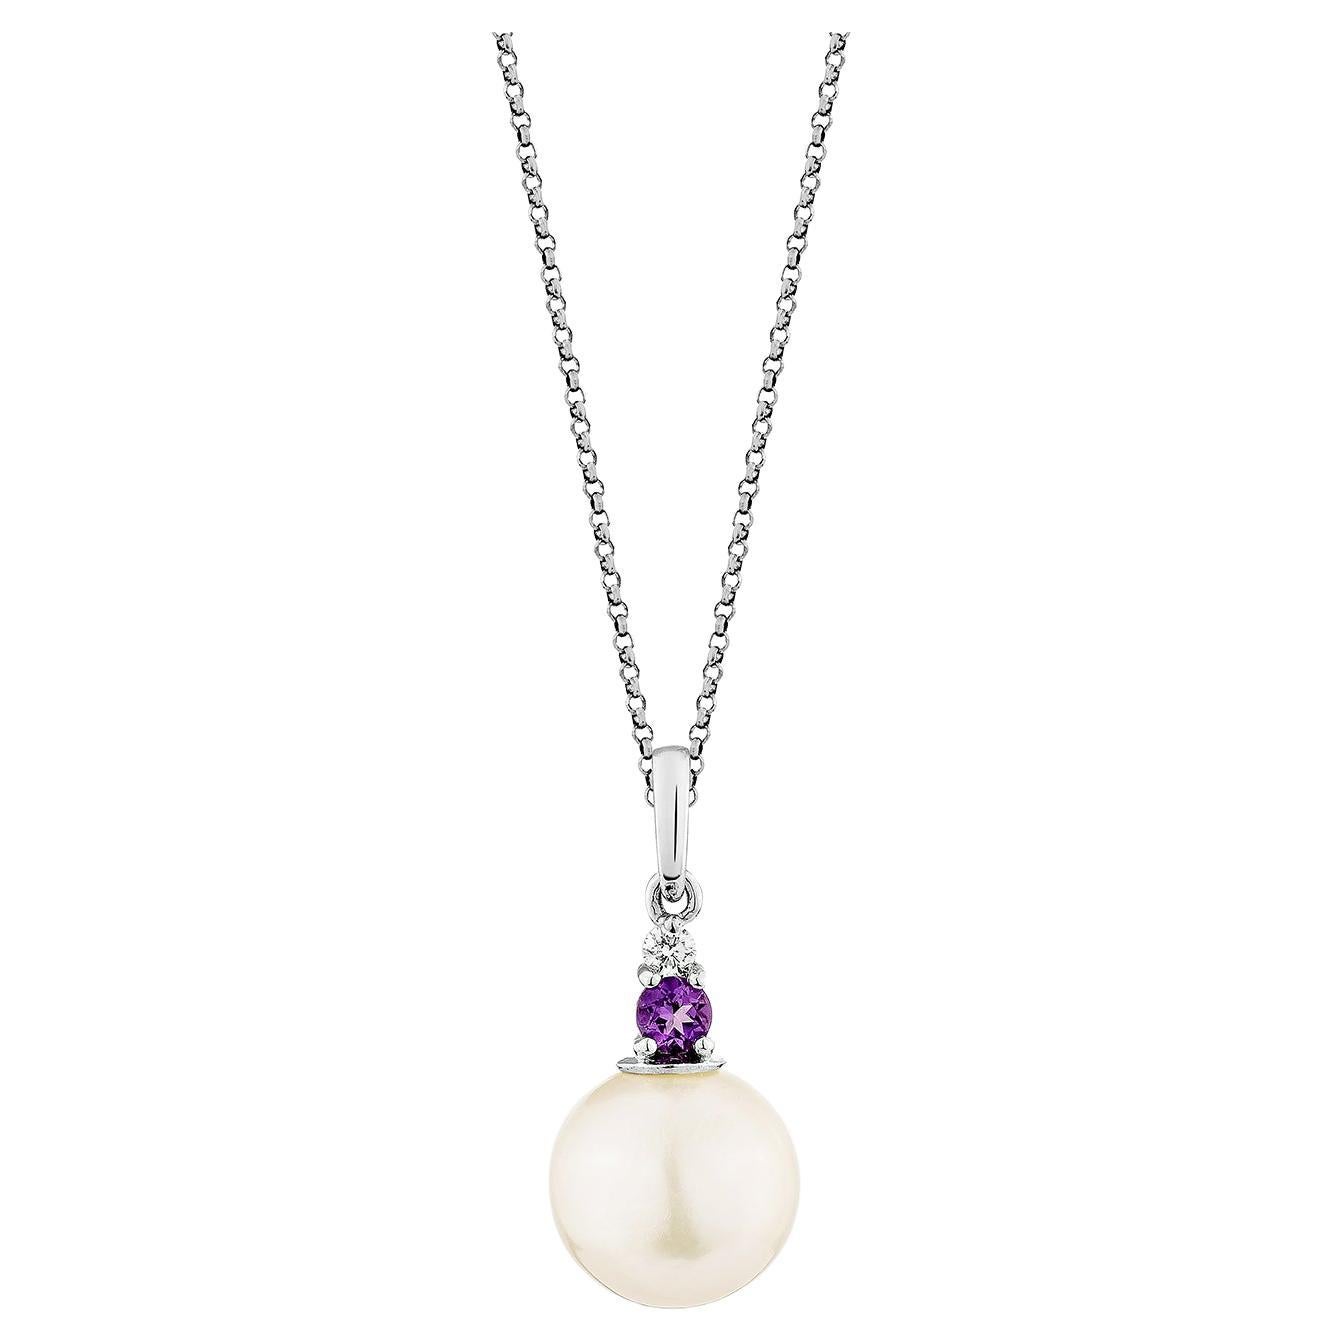 6.34 Carat White Pearl Pendant in 14KWG with Amethyst and White Diamond. For Sale